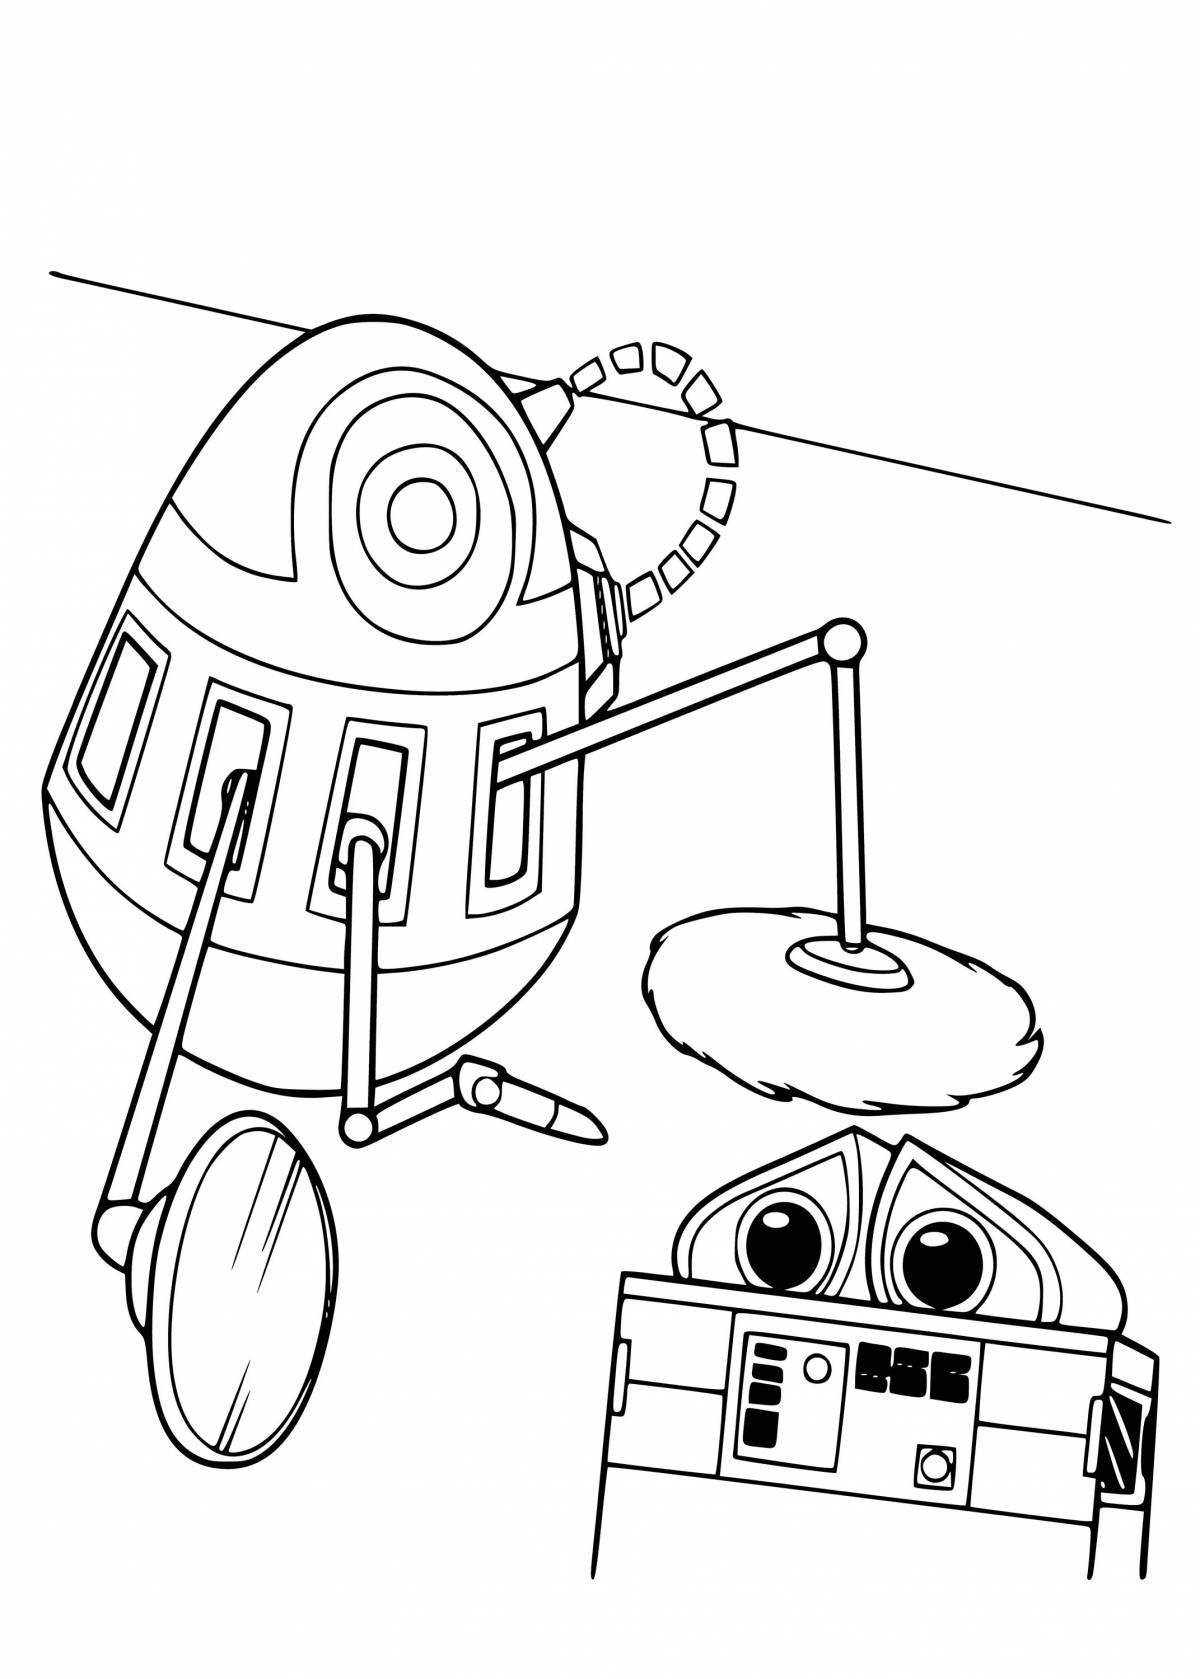 Cute robot vacuum cleaner coloring page